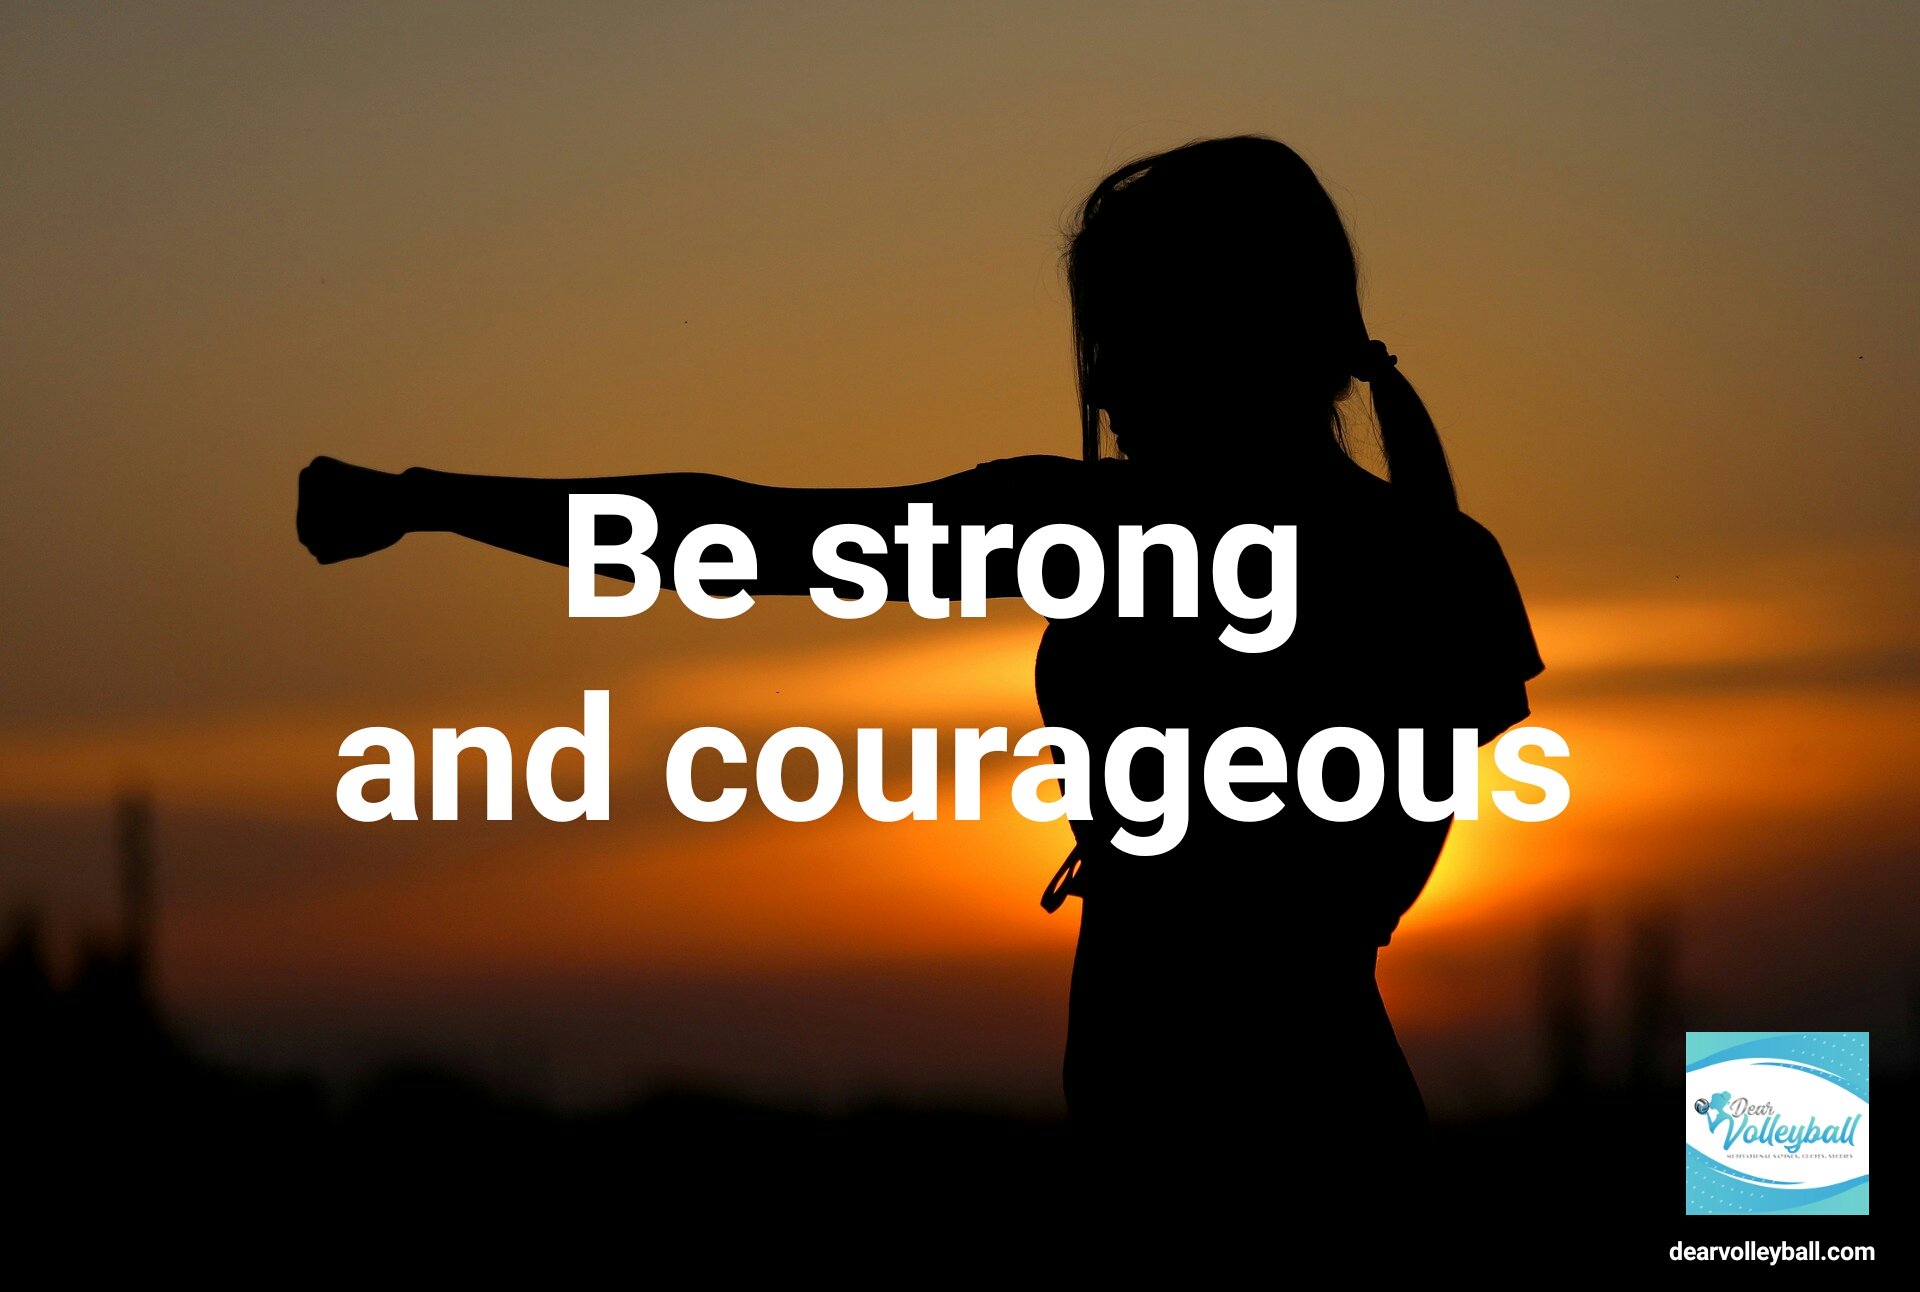 "Be strong and courageous" and other strong girls pictures paired with an inspirational volleyball quote on Dear Volleyball.com.